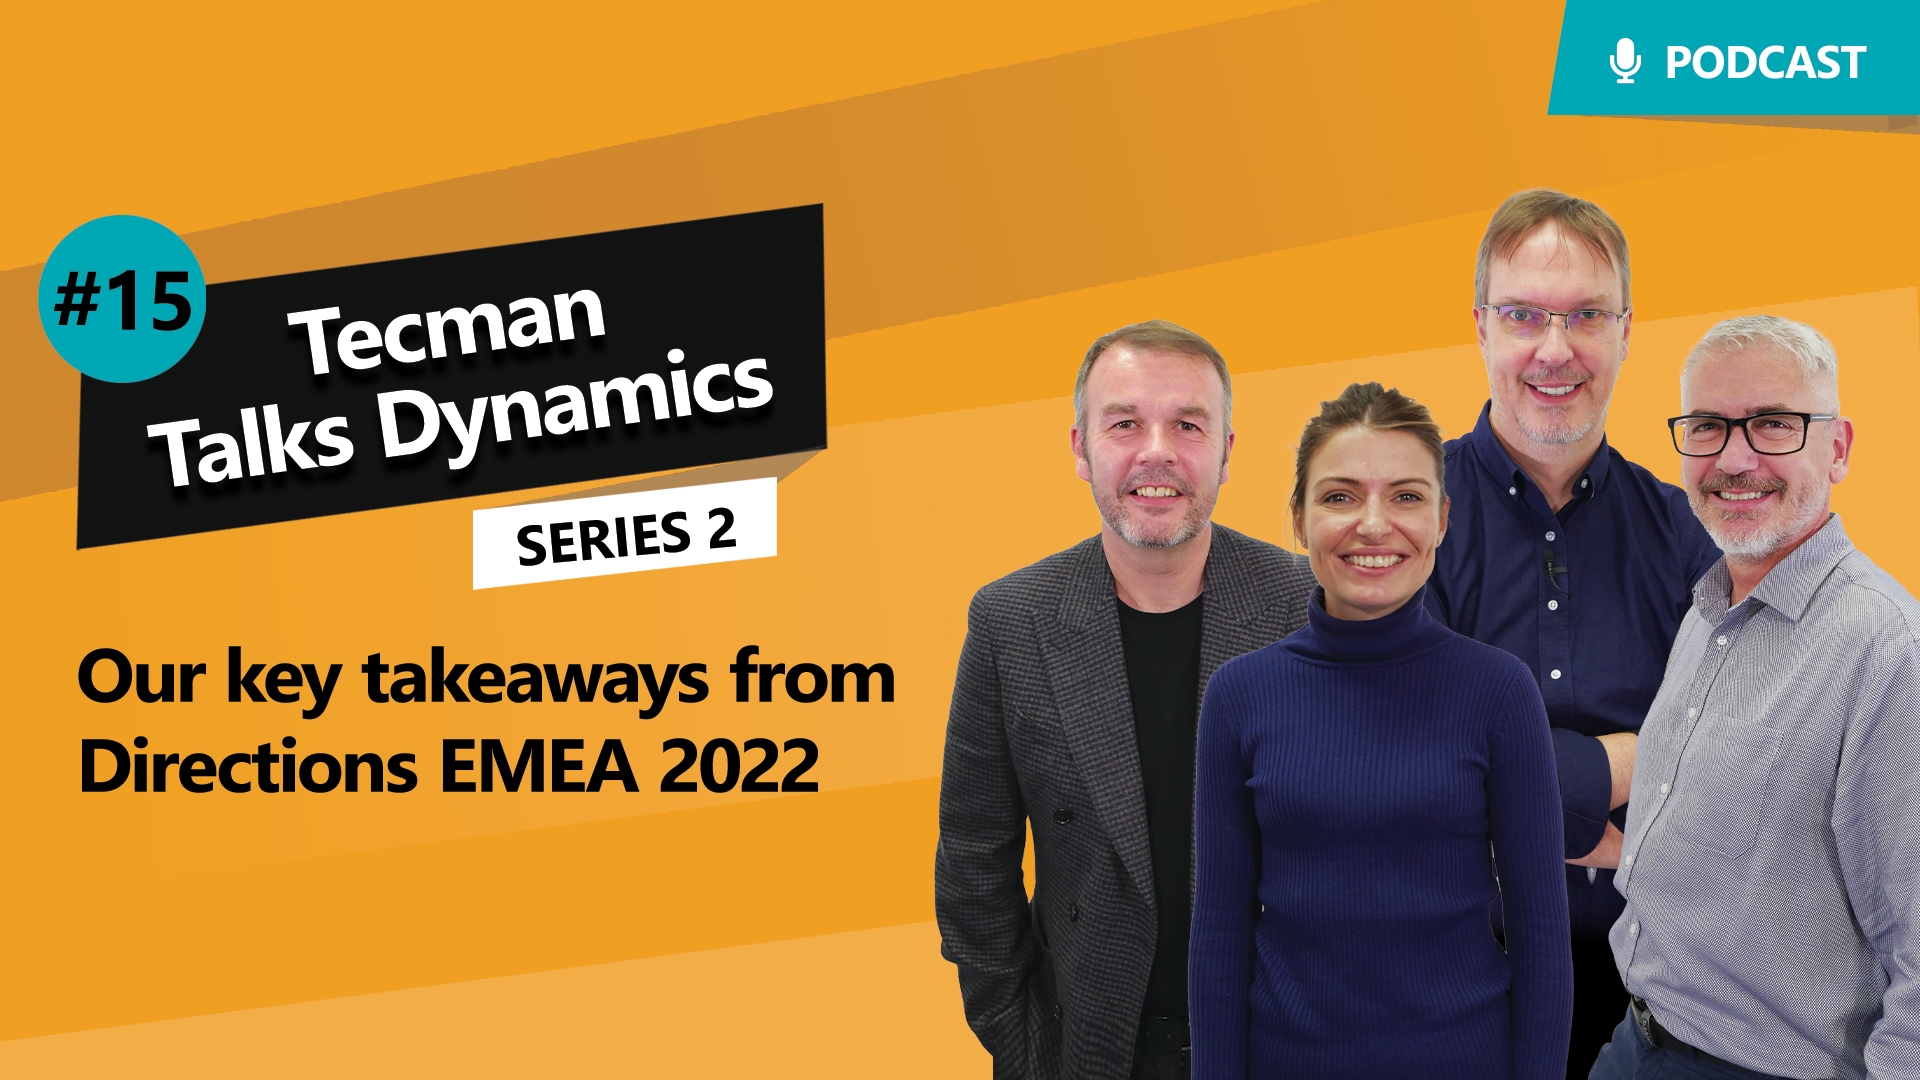 Our key takeaways from Directions EMEA 2022